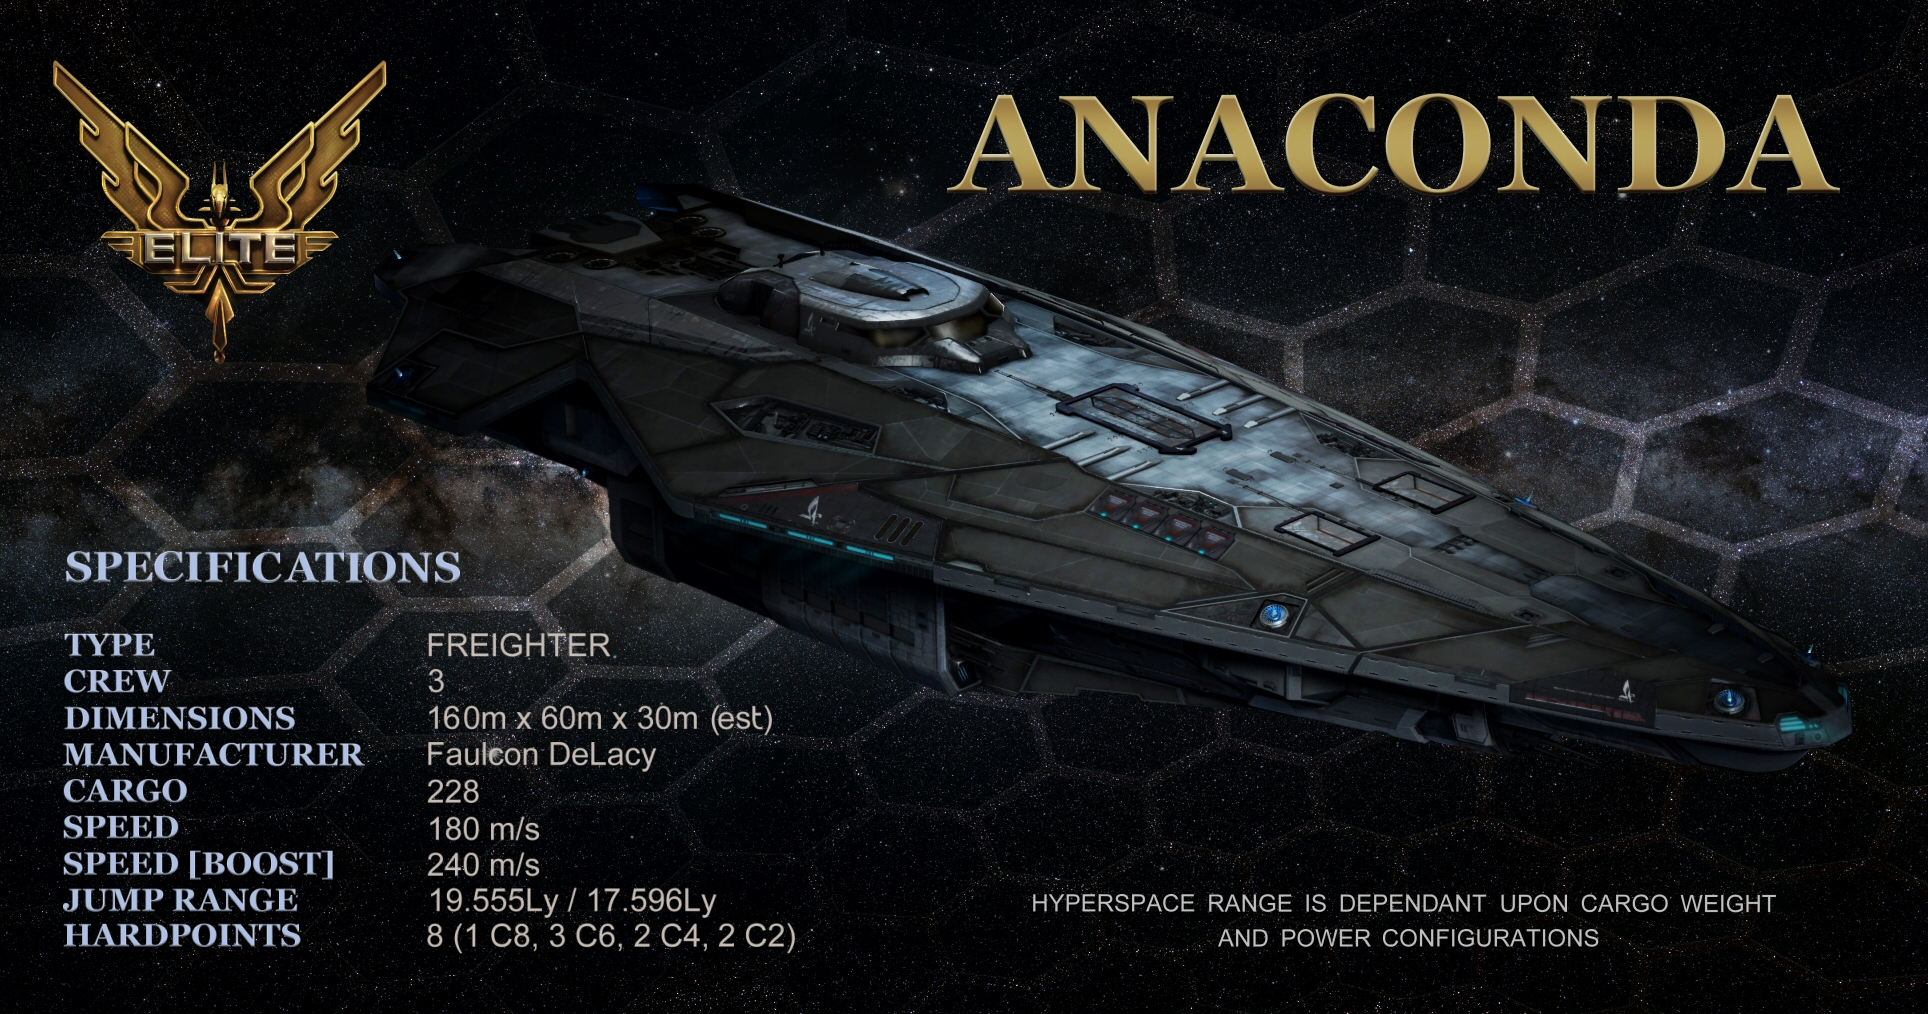  ship specification wallpapers out there so forgive any replication